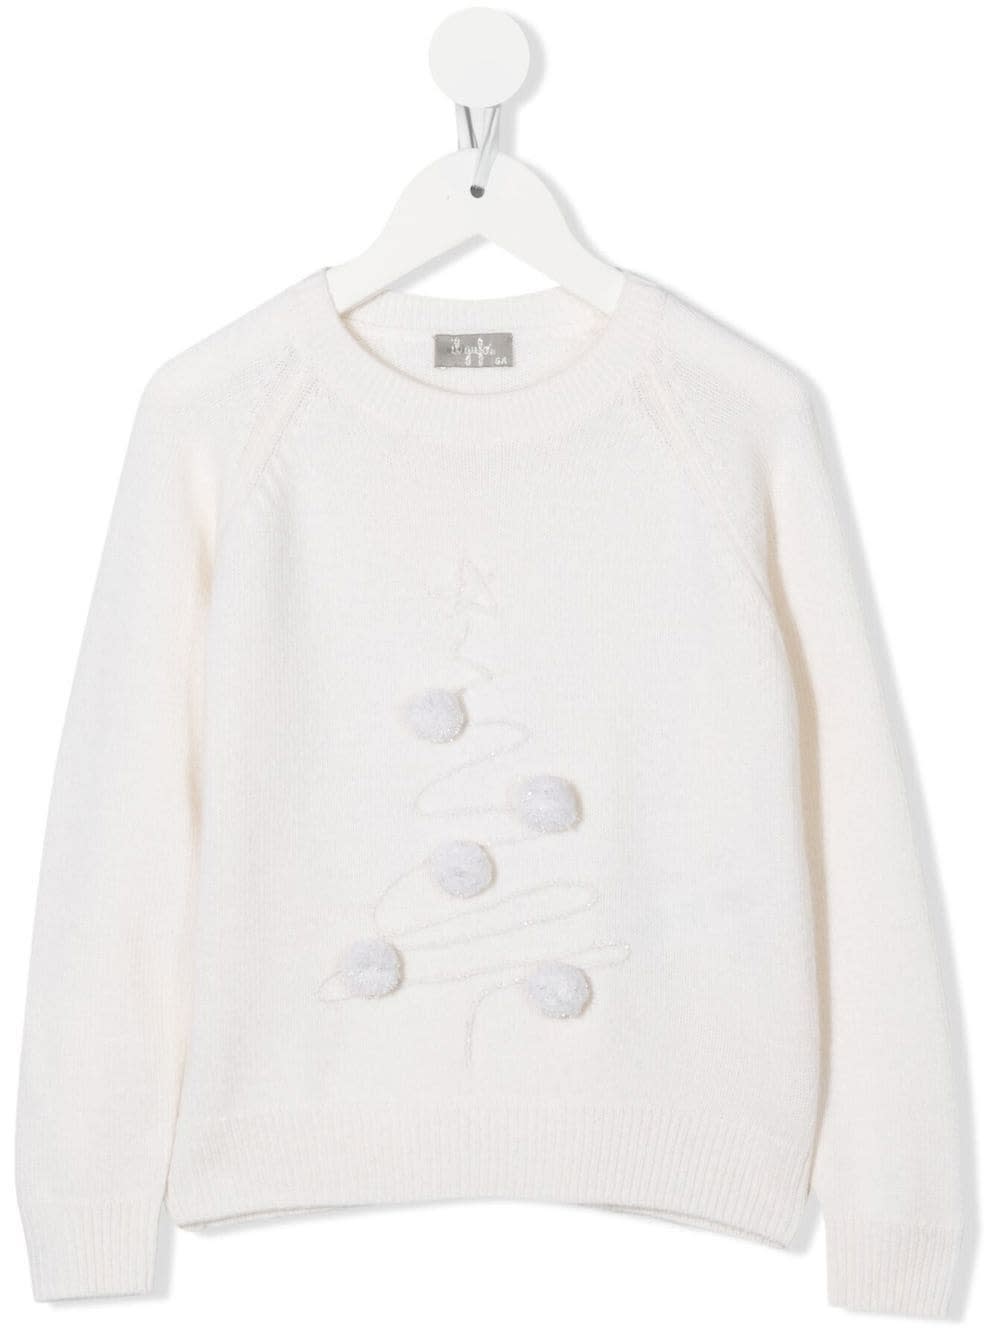 Il Gufo Kids White Sweater With Embroidered Christmas Tree